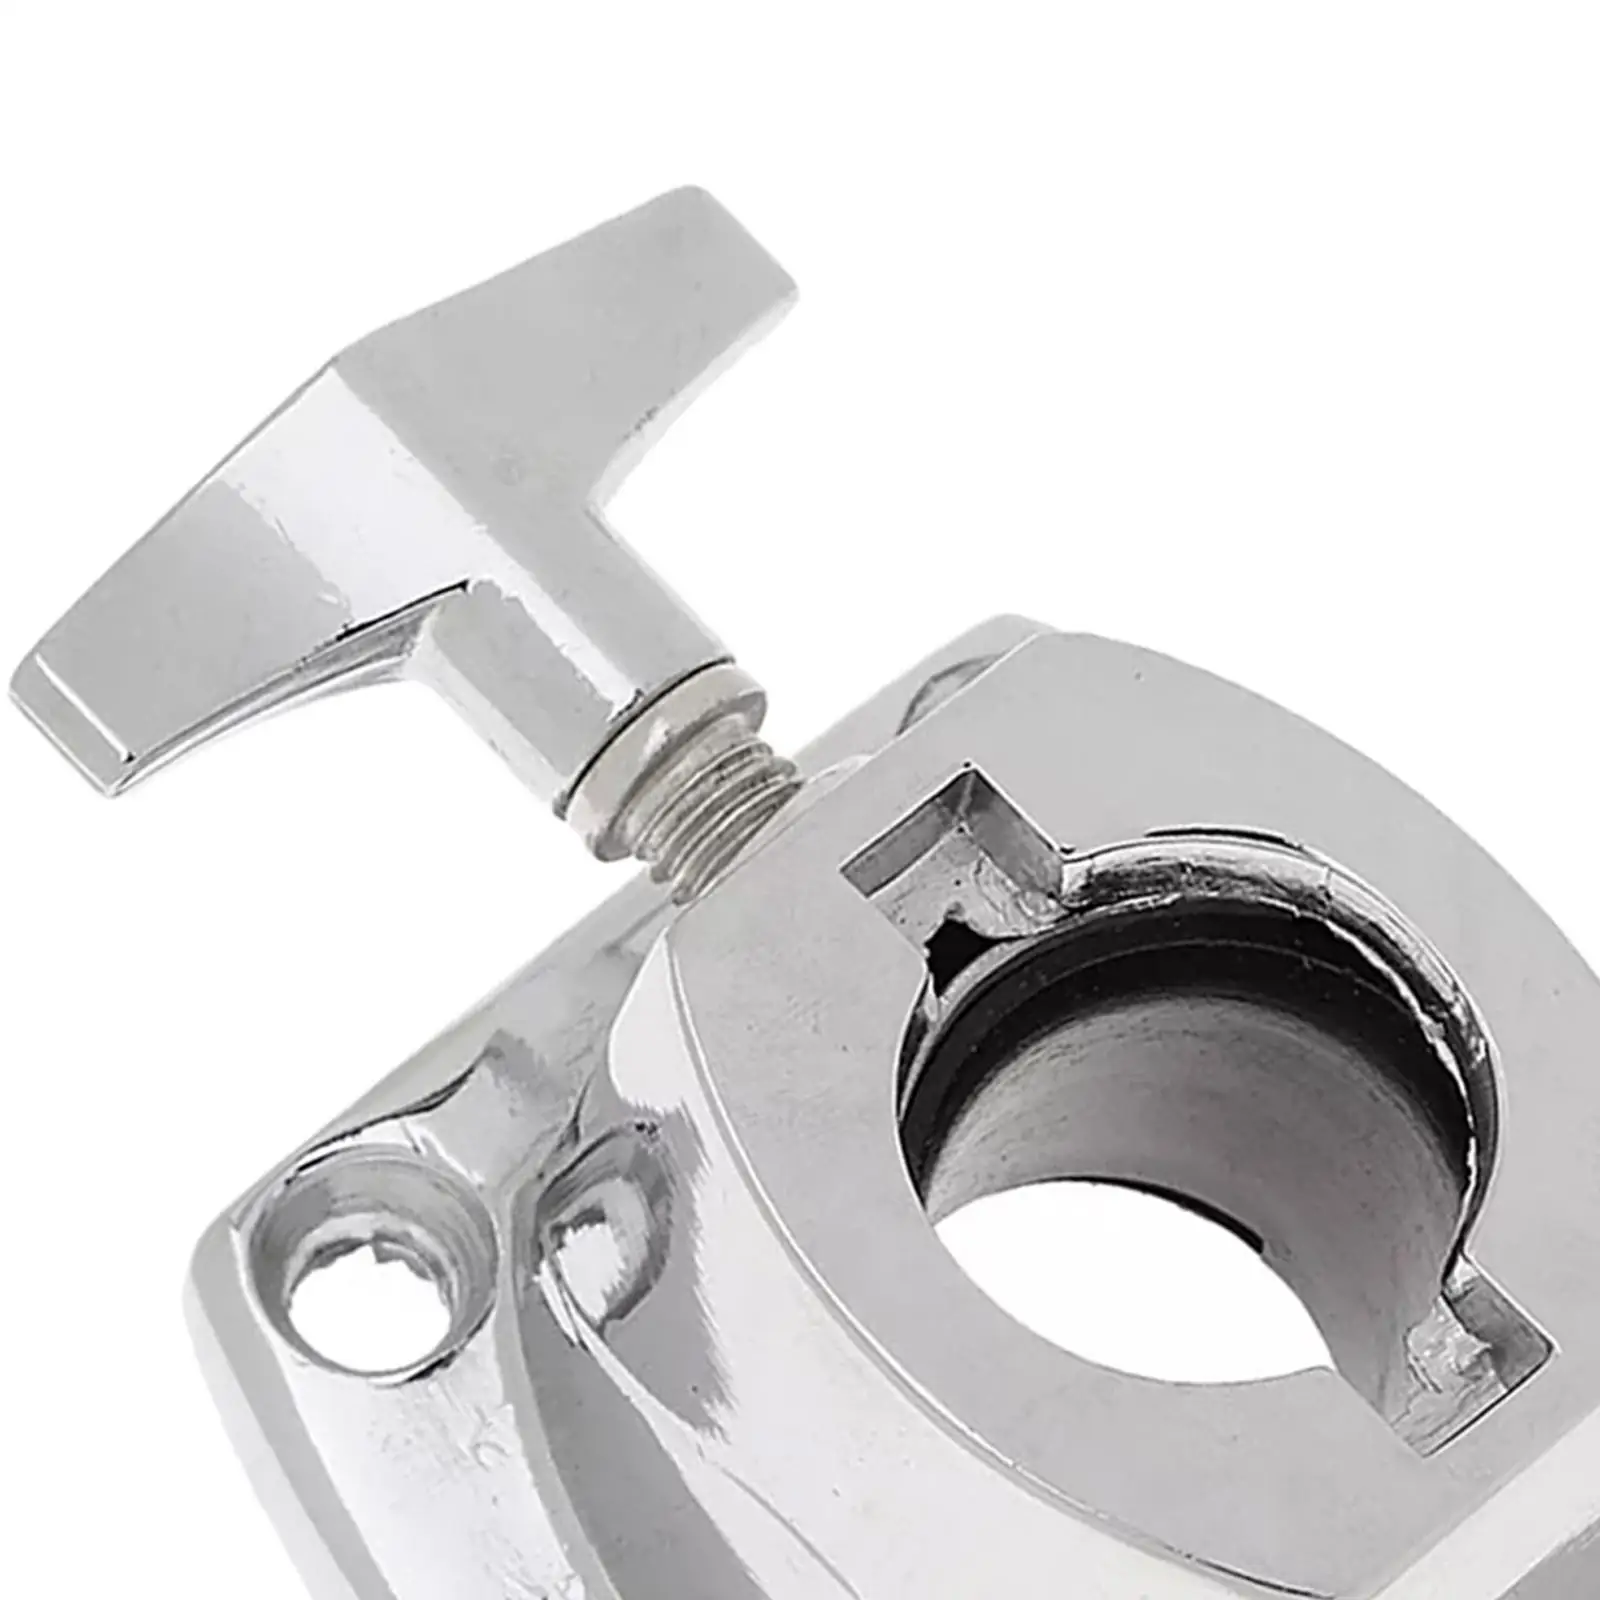 Tom Cymbal Holder Clamp Professional Cymbal Clamp for Drum Set Quality